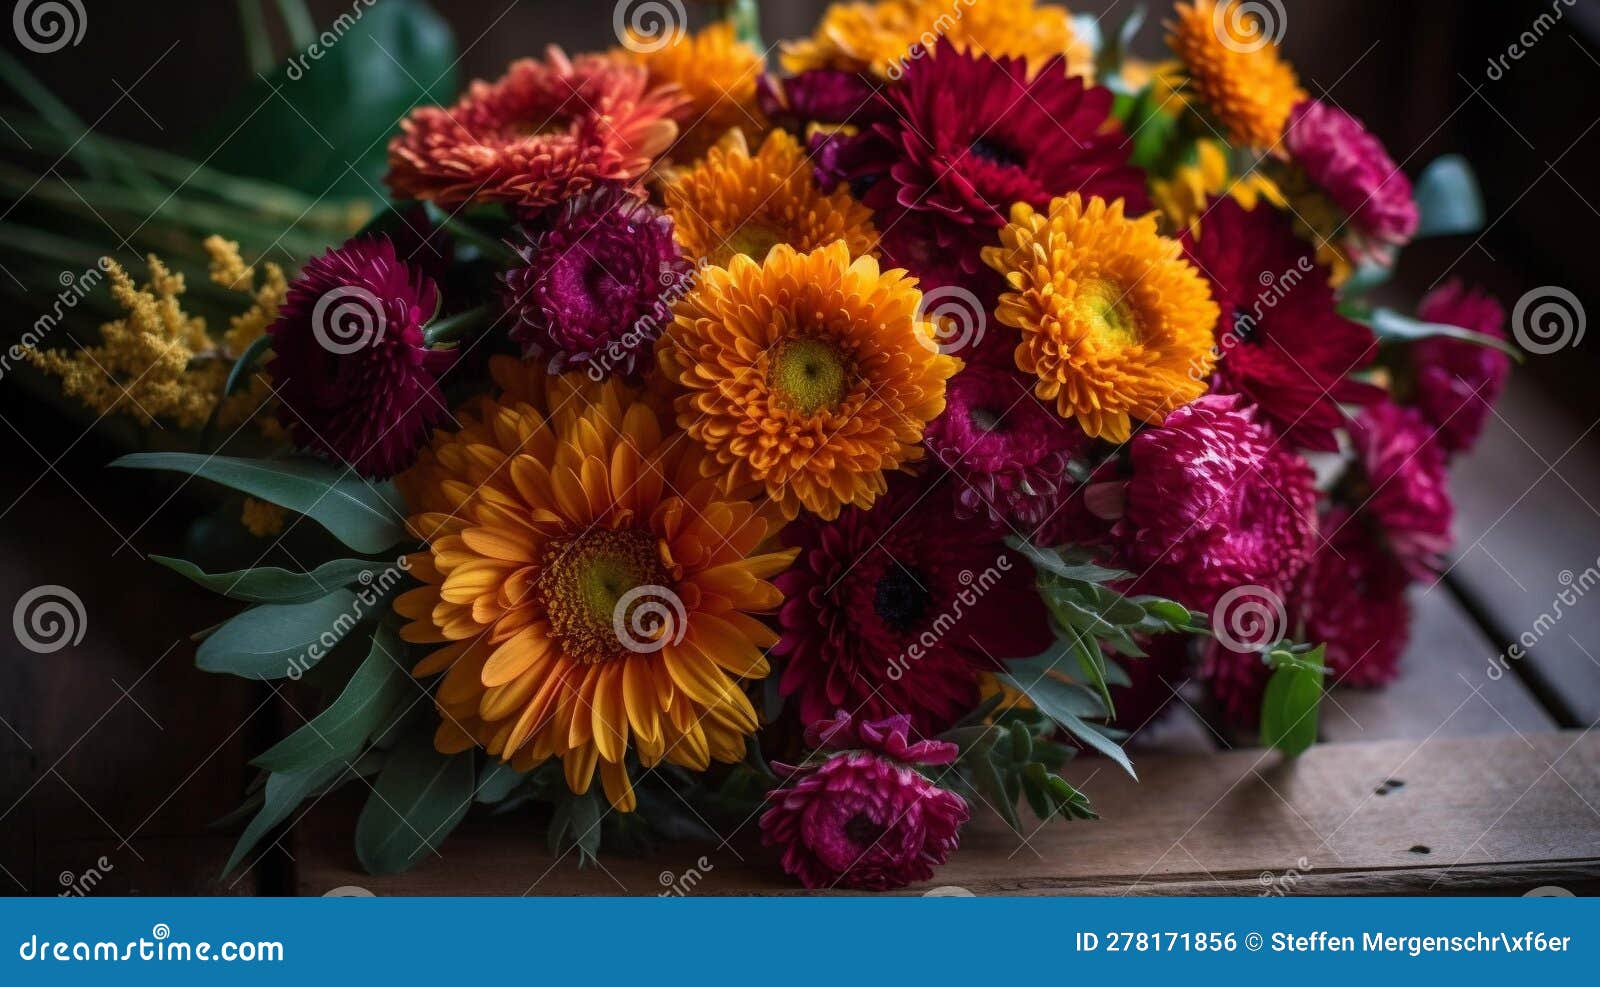 midday blooms: a colorful fall bouquet on rustic surface